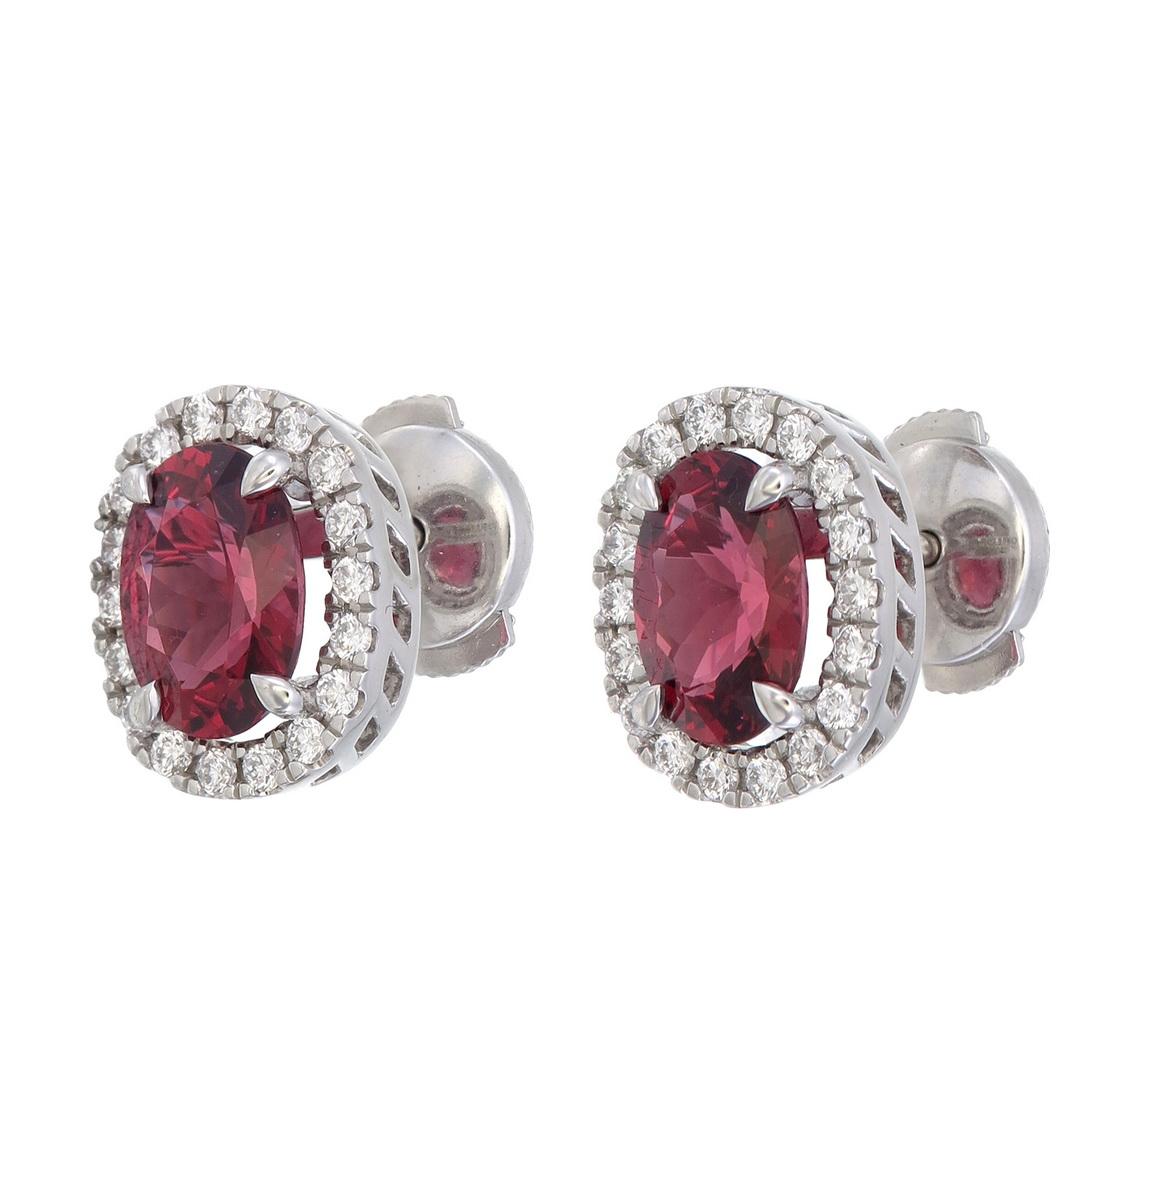 Orloff of Denmark;

Sharing an incredible brillance and color, this pair of Red Spinels, parred with lustrous VS1, G-H Diamonds make an incredible pair of earrings teeming with confidence and strength.

;We here at Orloff of Denmark are more than